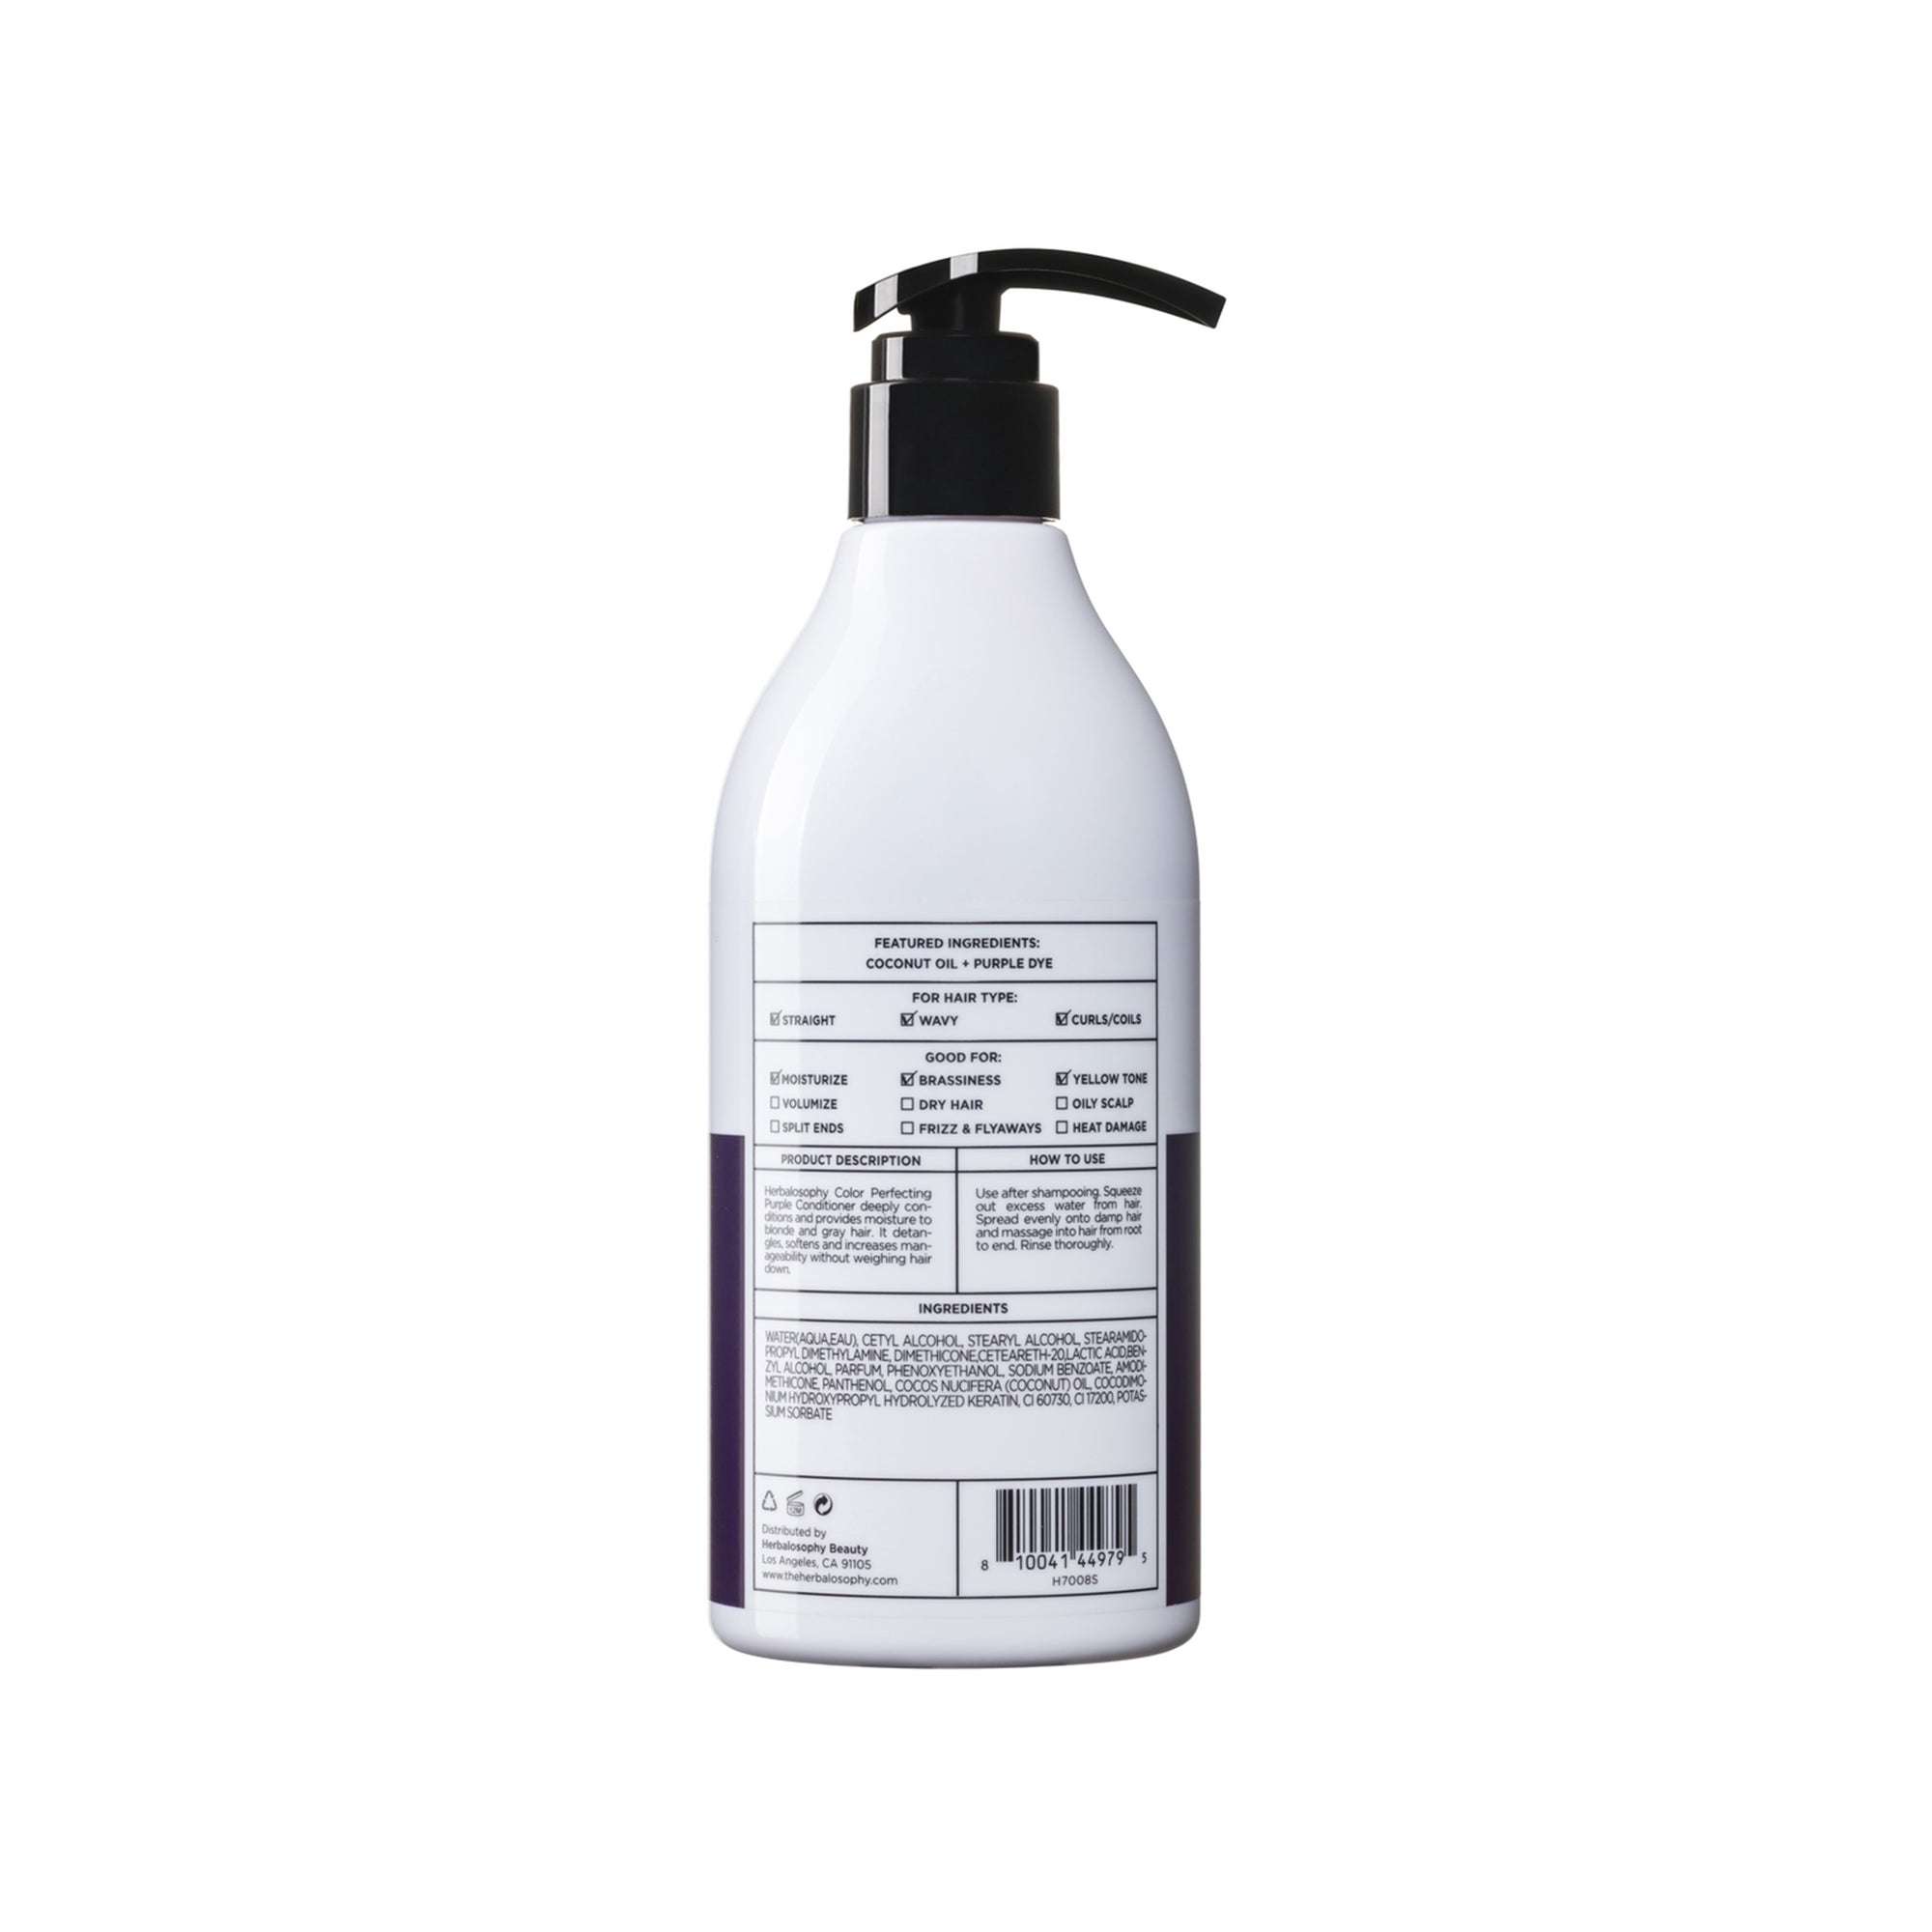 Herbalosophy Color Perfecting Purple Shampoo bottle front